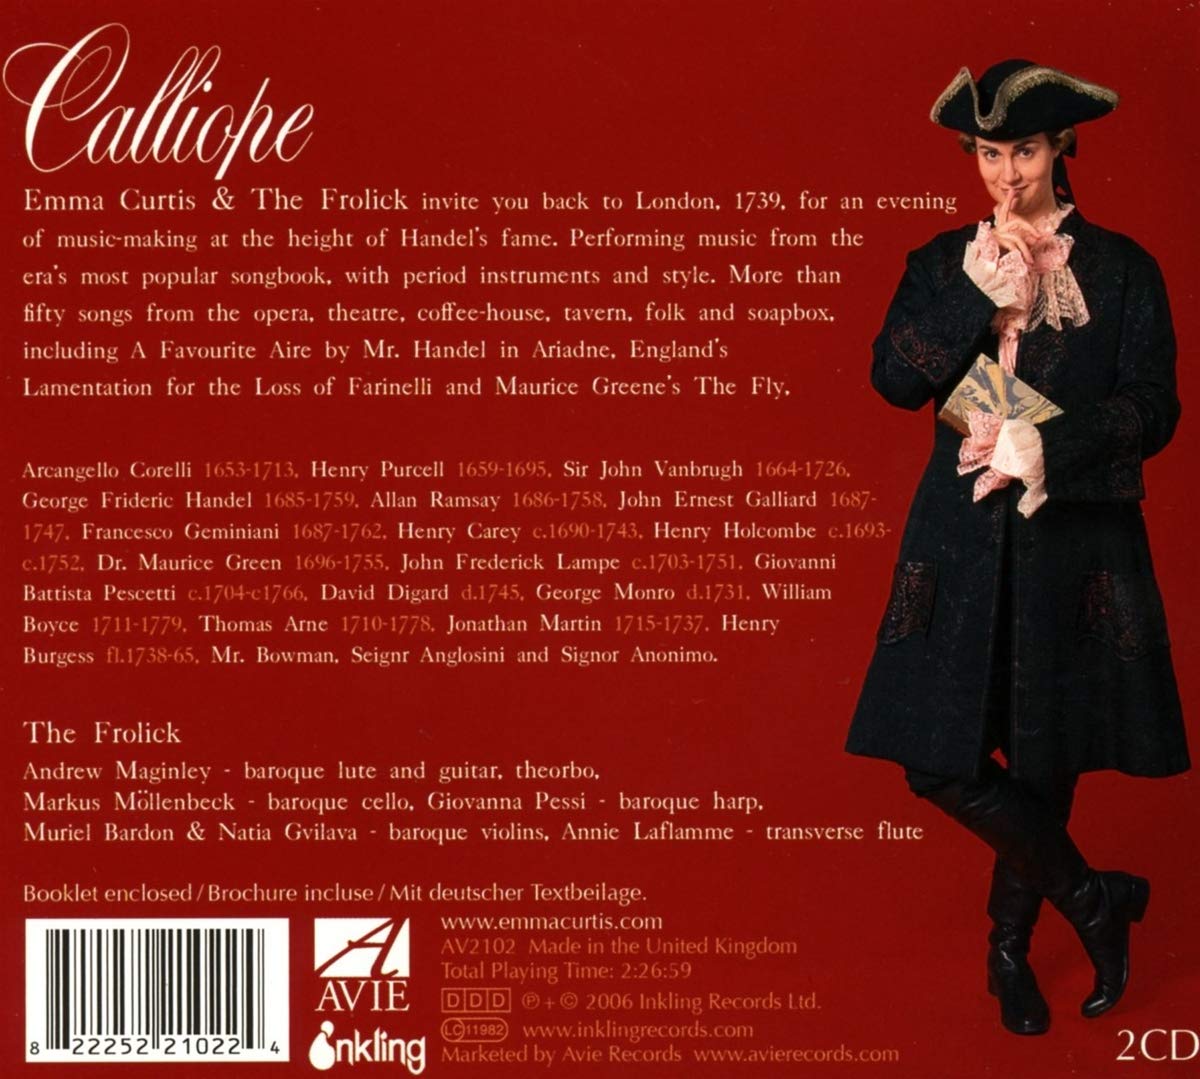 Calliope, Volume the First: Songbooks of the 1700s - Emma Curtis, The Frolick (2 CDS)